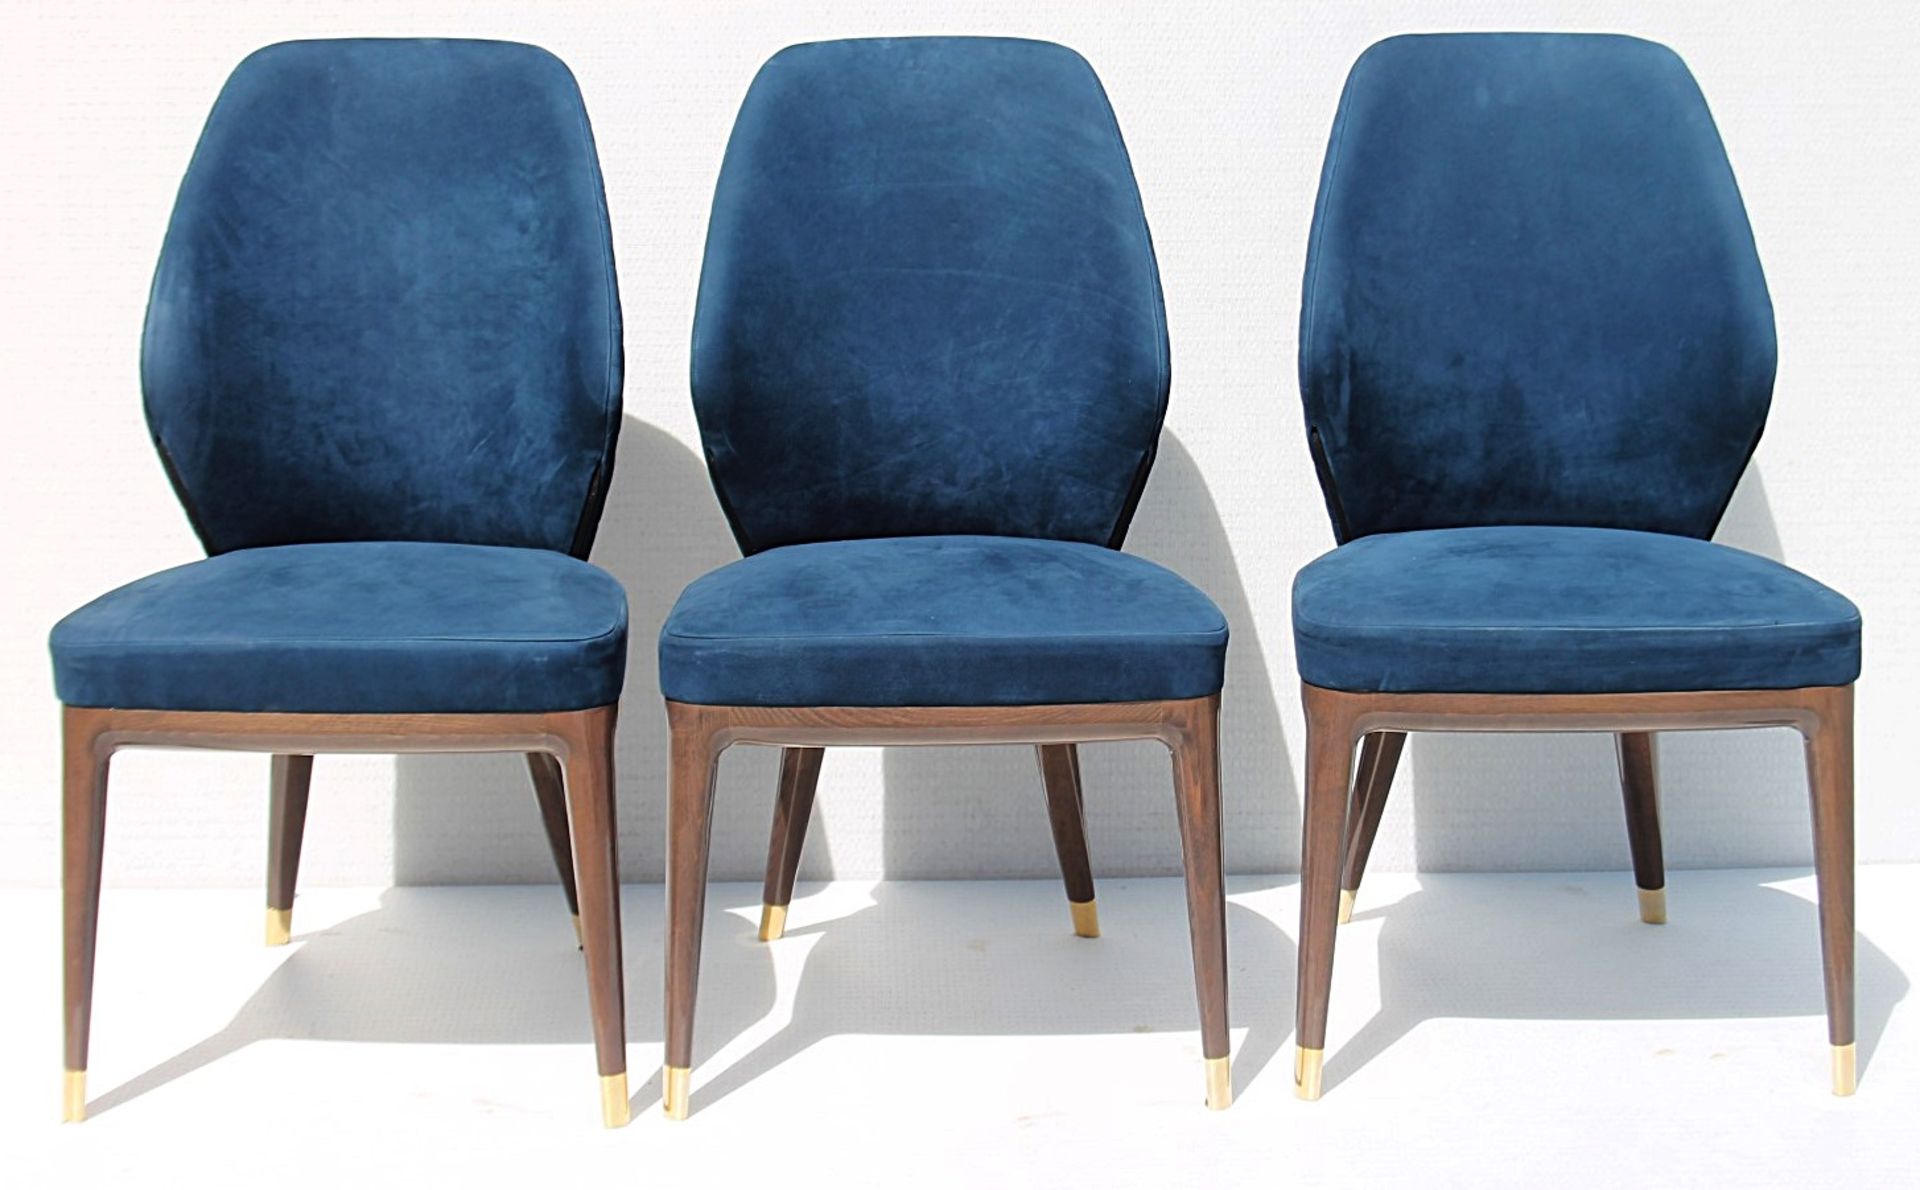 6 x GIORGIO COLLECTION 'Charisma' Luxury Dining Side Chairs In Blue - Total Original Price £15,330 - Image 3 of 17